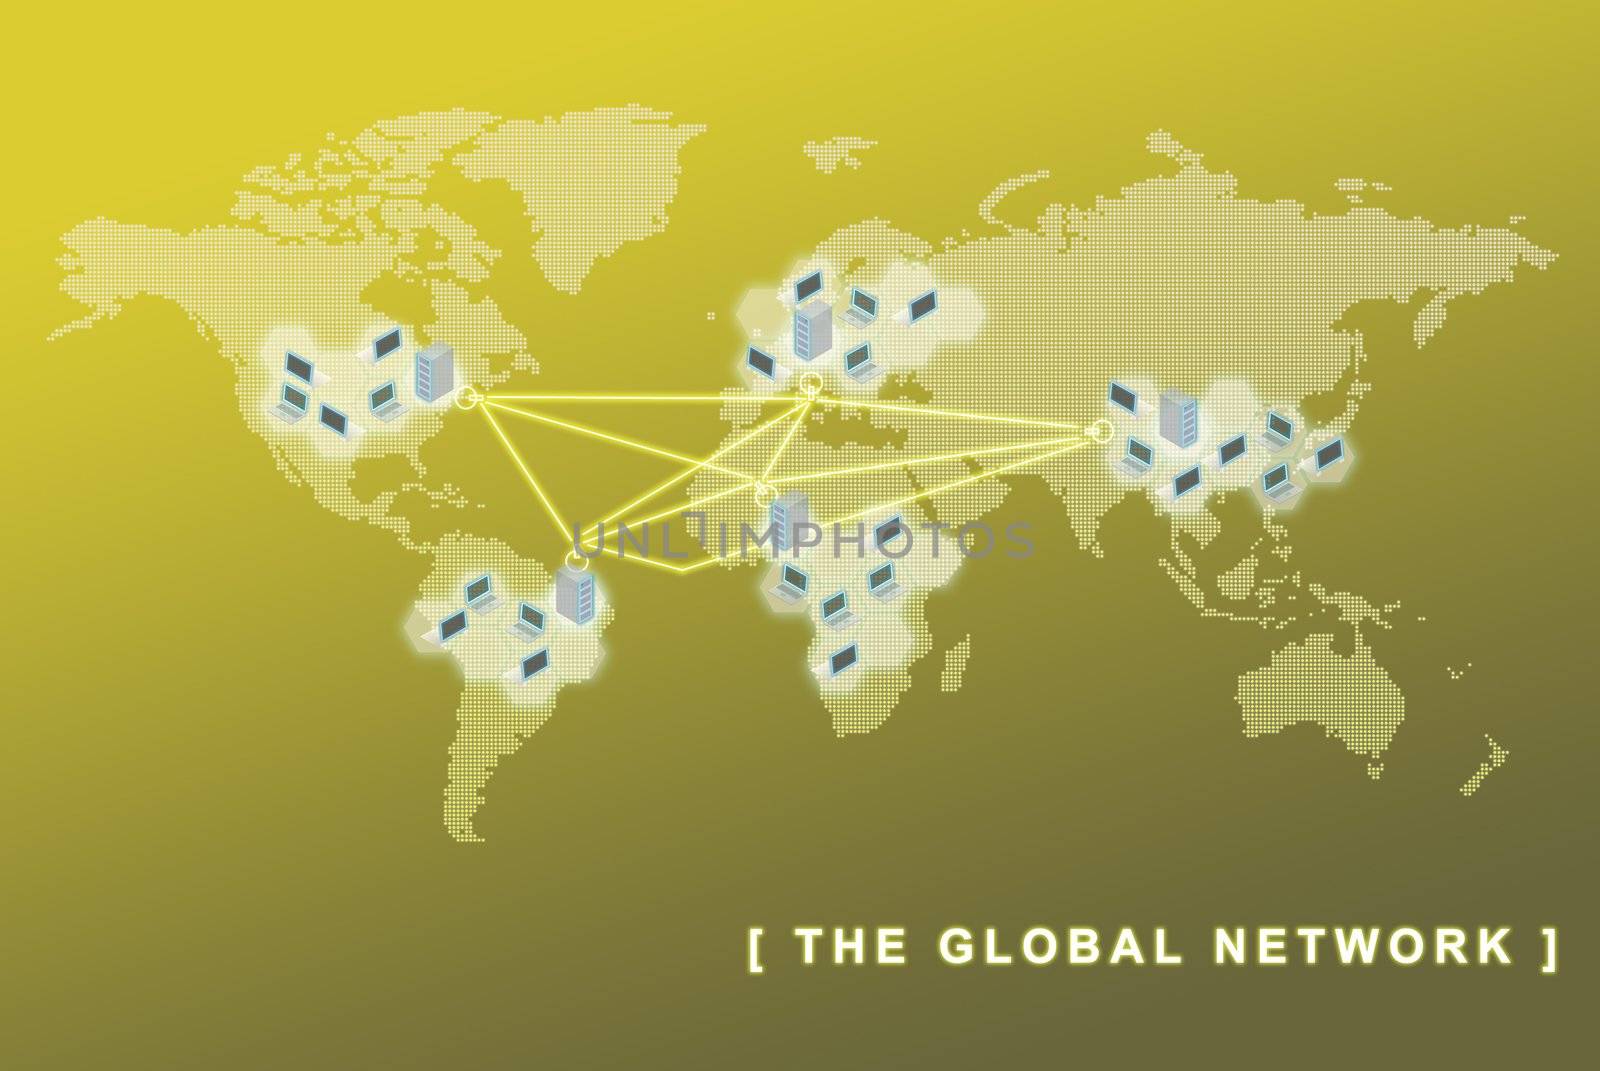 The global network business concept by sasilsolutions